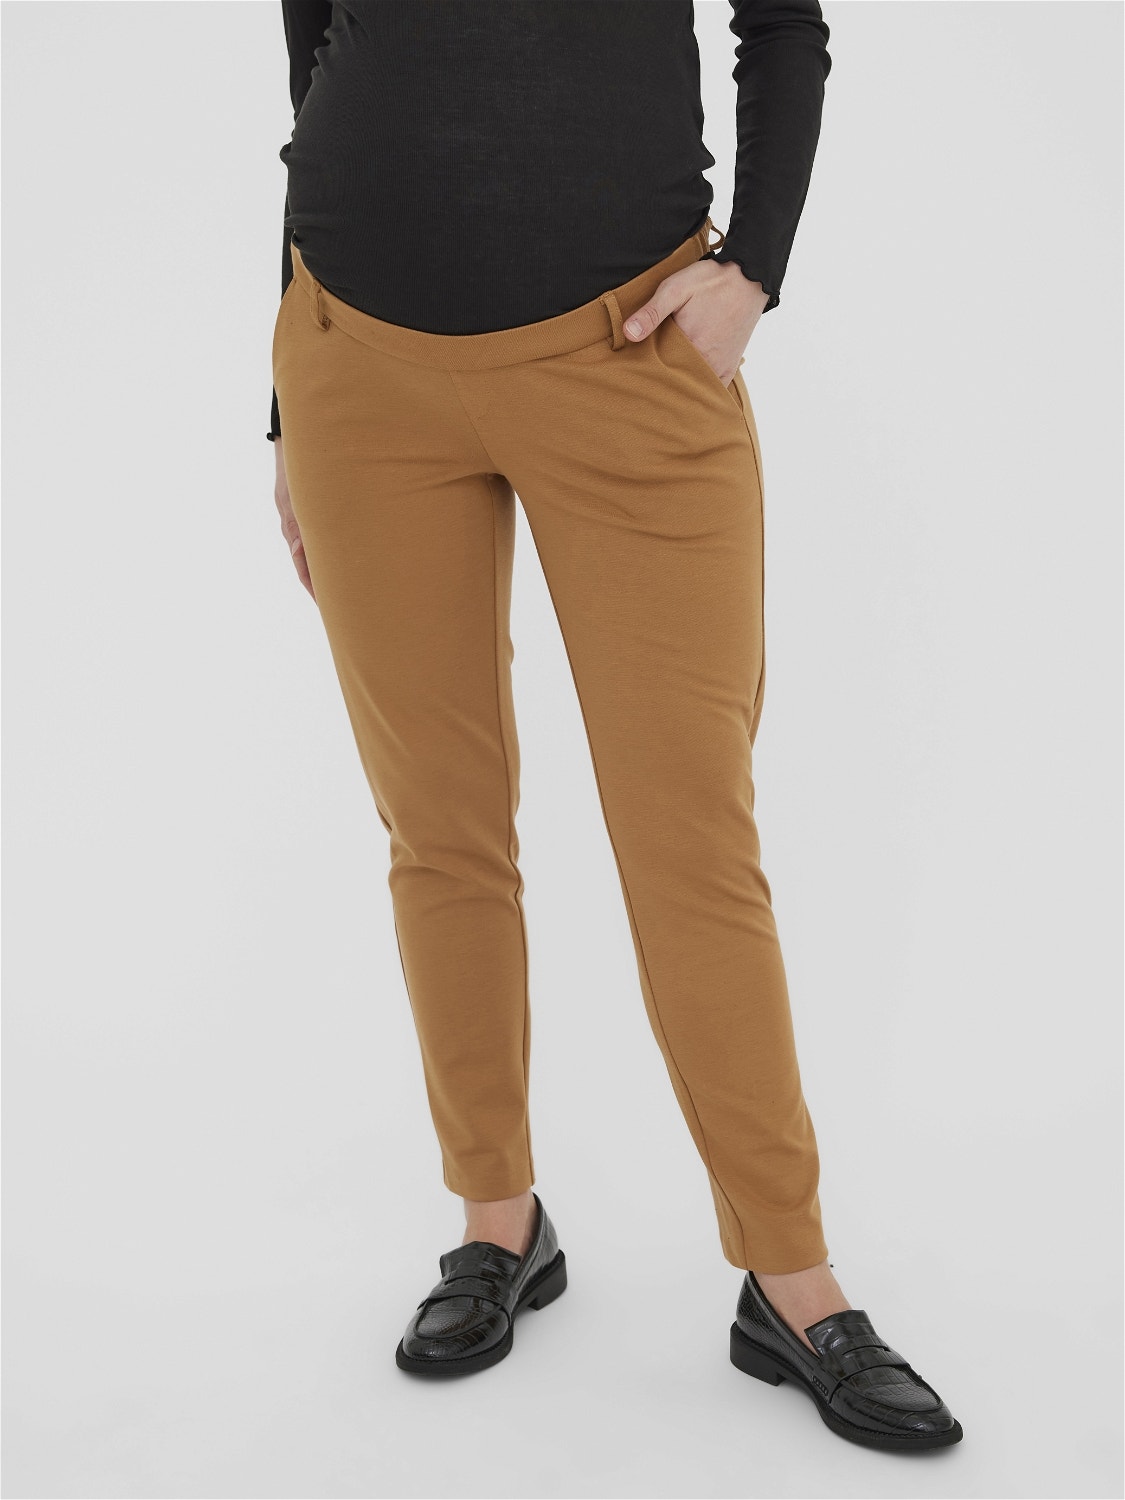 MAMA.LICIOUS Tapered Fit Trousers -Tobacco Brown - 20015718